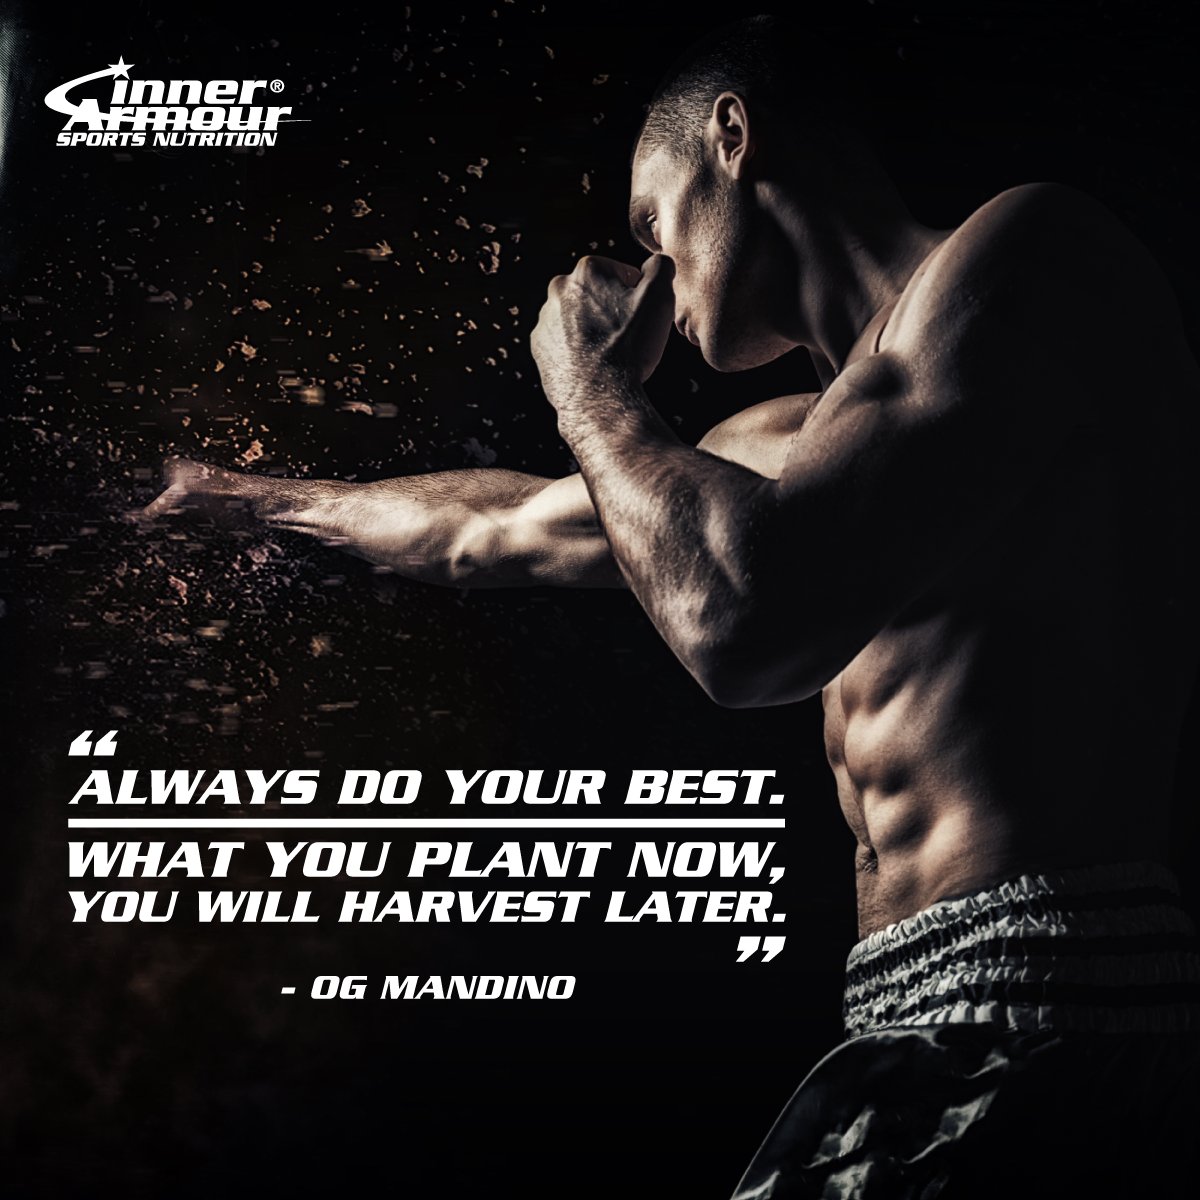 Always do your best. What you plant now, you will harvest later. - OG Mandino #InnerArmour #StrengthFromWithin #indisputableresults #sportsnutrition